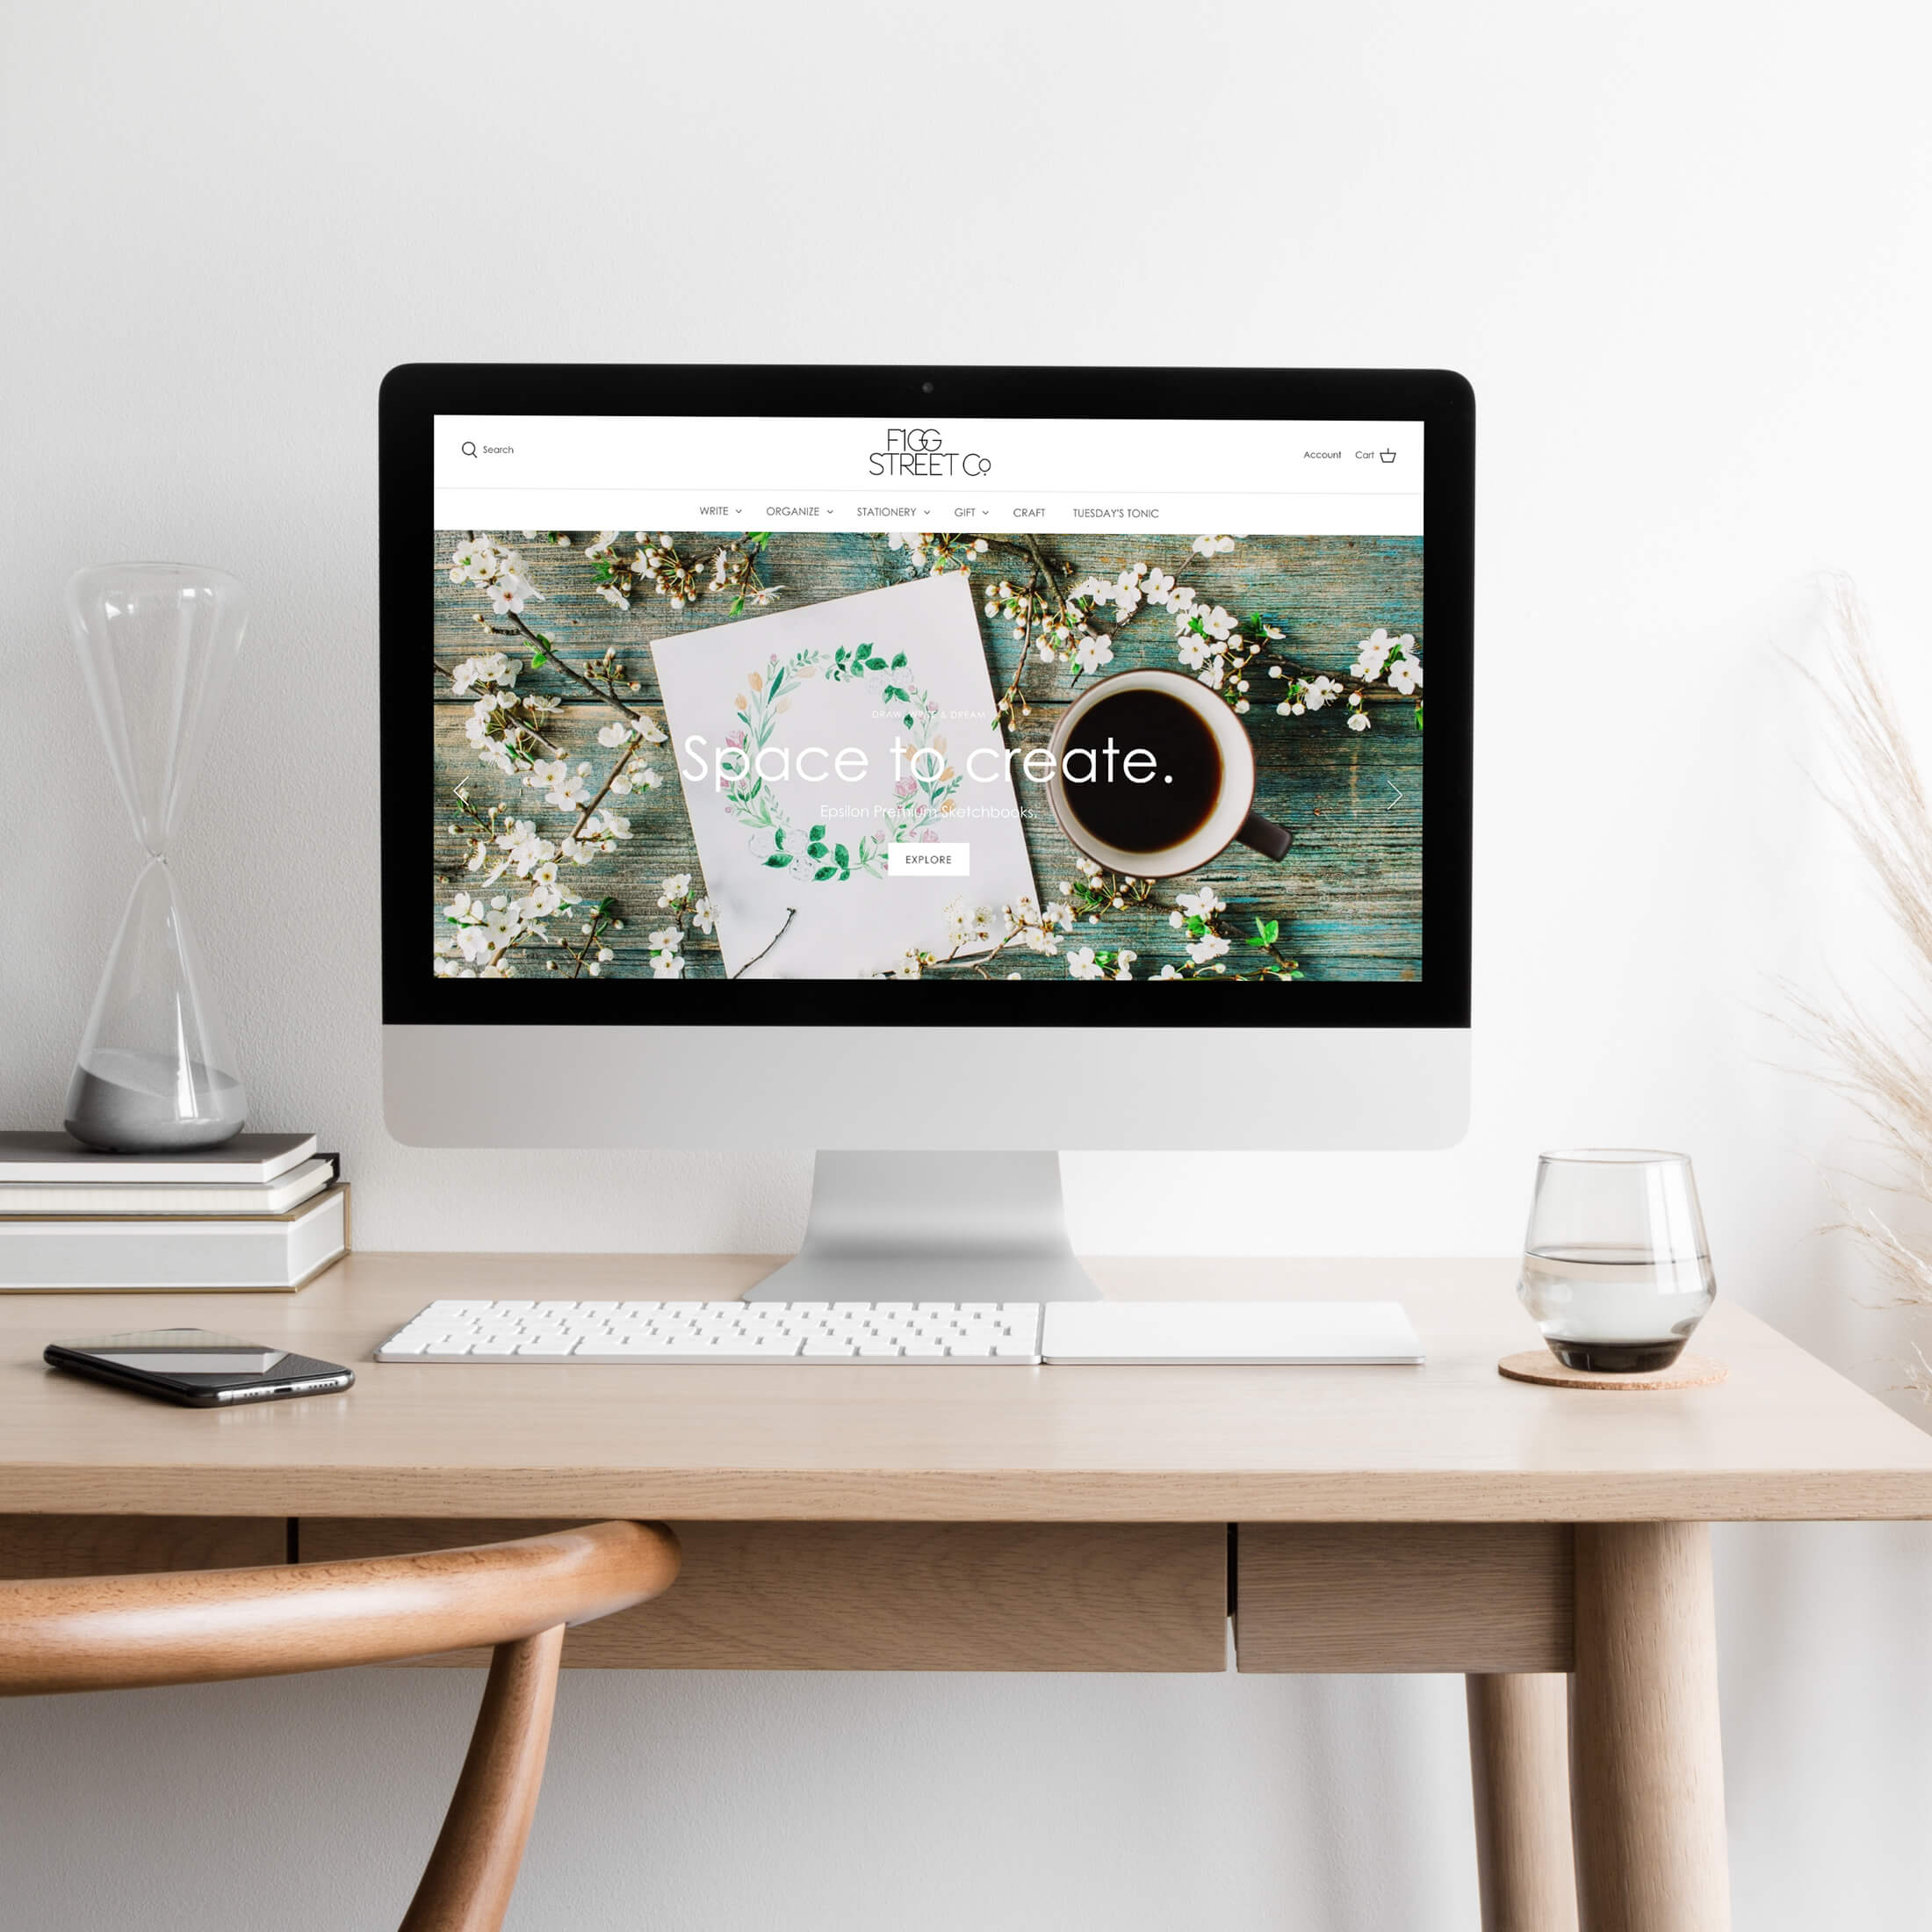 Shopify Website for Figg Street Co. of Thorold in Niagara designed by Tulip Tree Creative